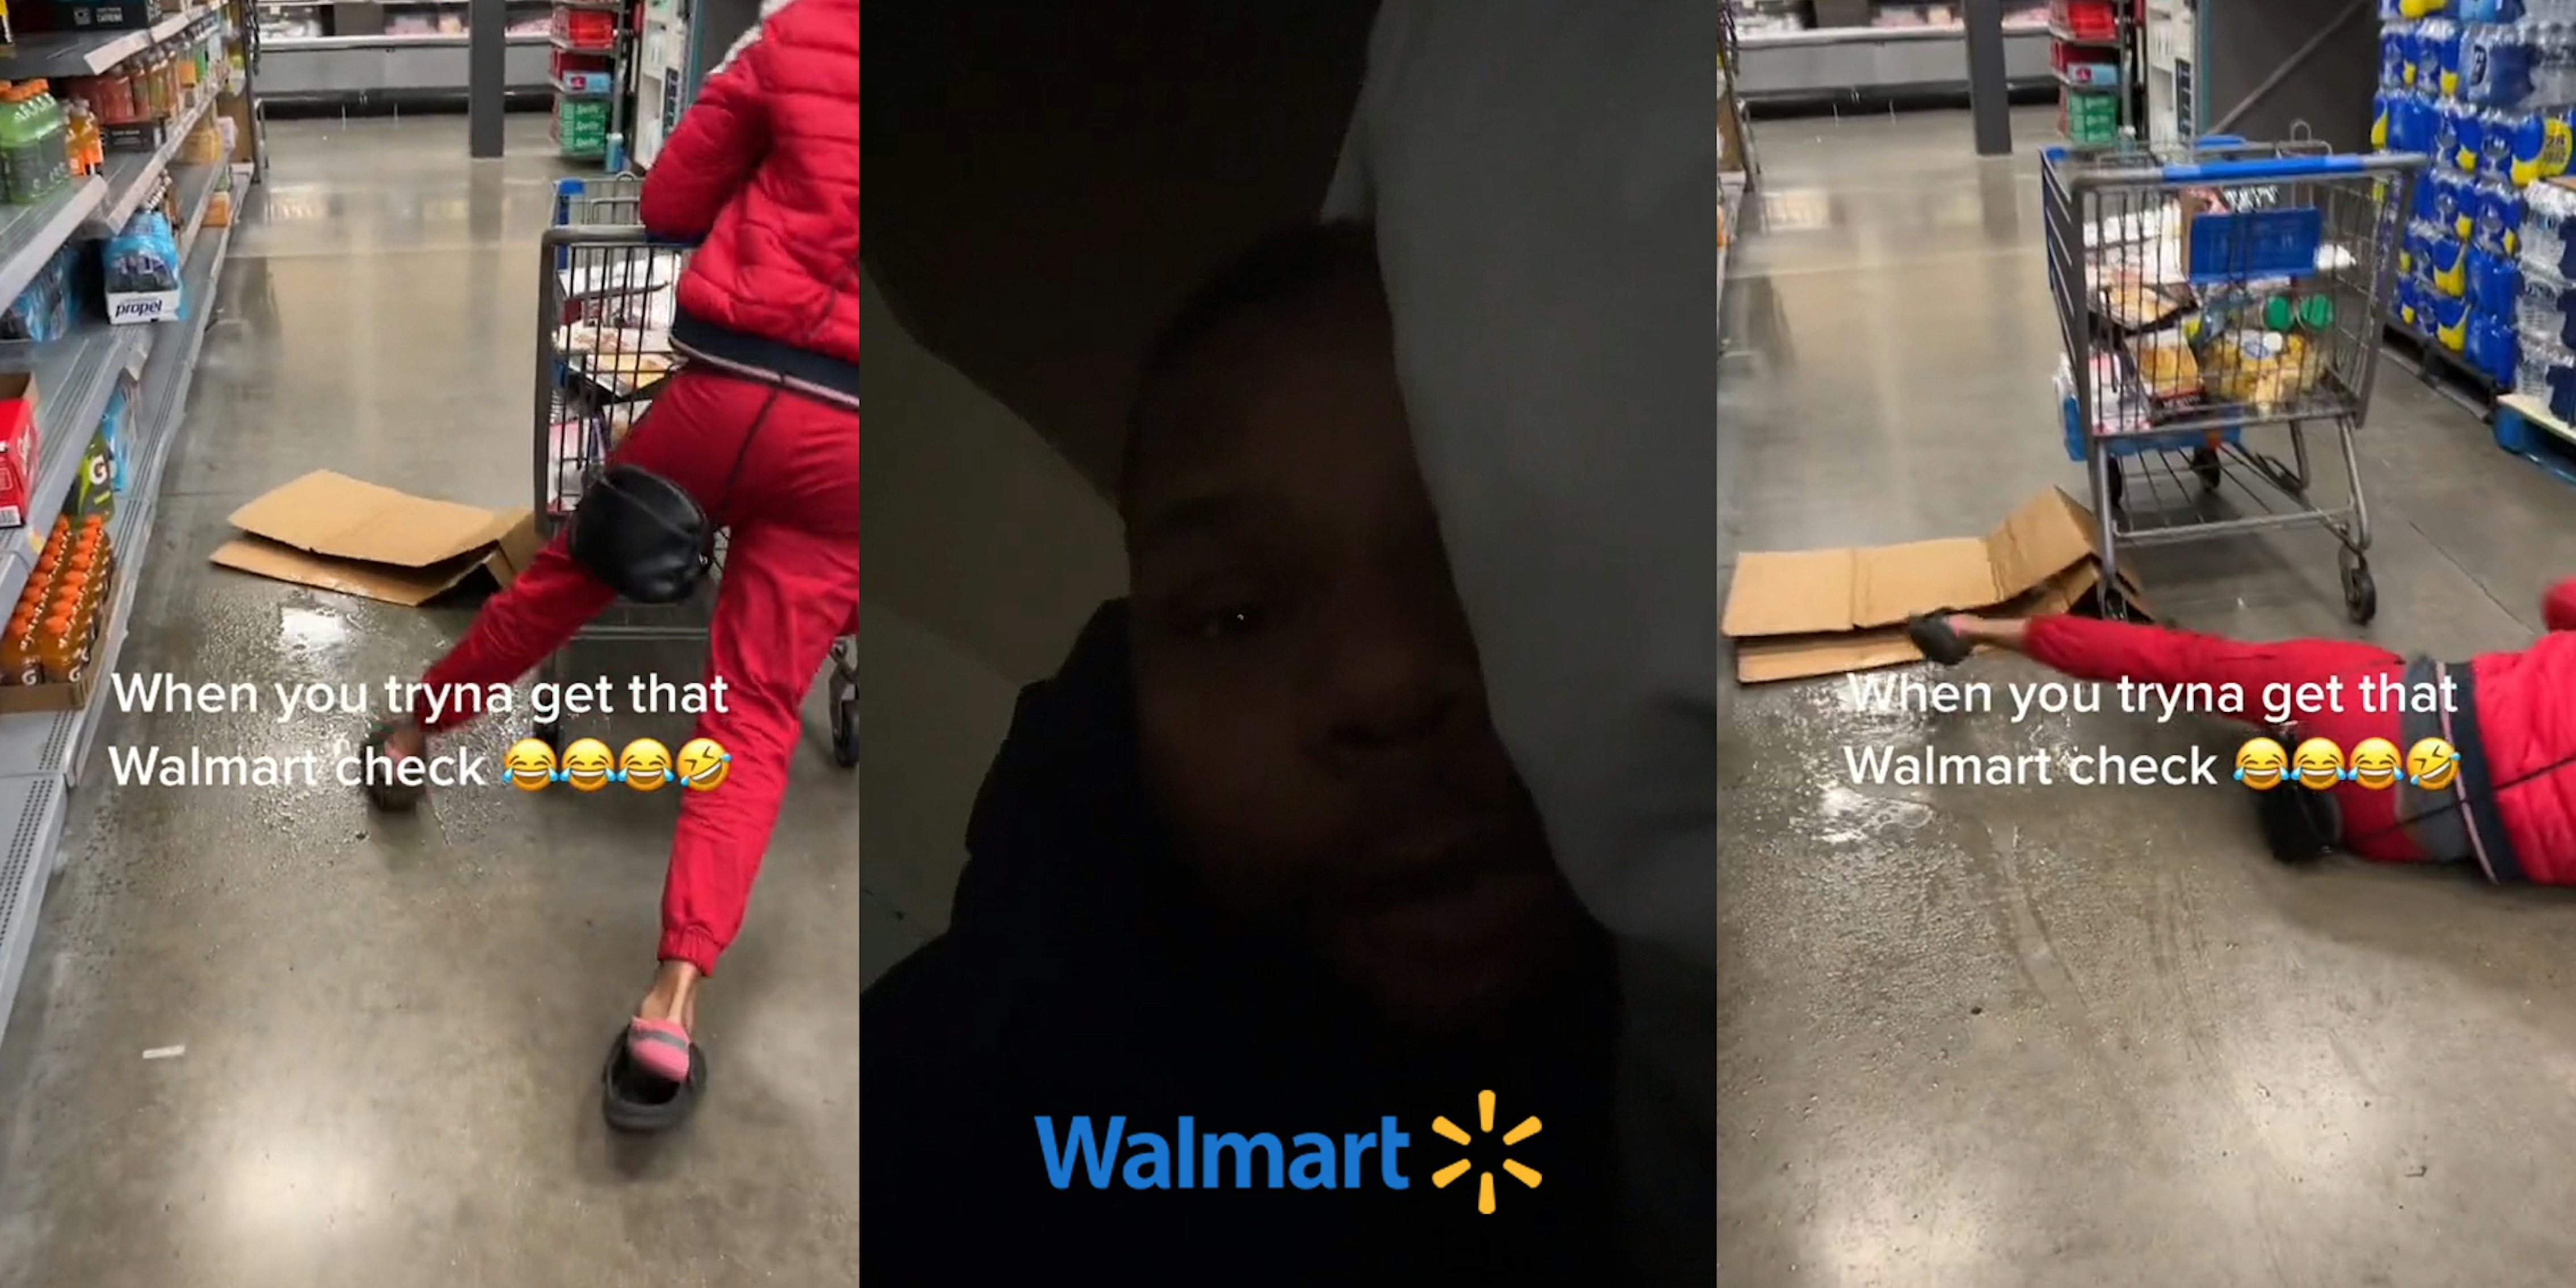 woman at Walmart pushing cart with foot out towards wet floor caption 'When you tryna get that Walmart check' (l) Walmart employee speaking on bed with Walmart logo centered at the bottom (c) Woman on floor at Walmart caption 'When you tryna get that Walmart check' (r)